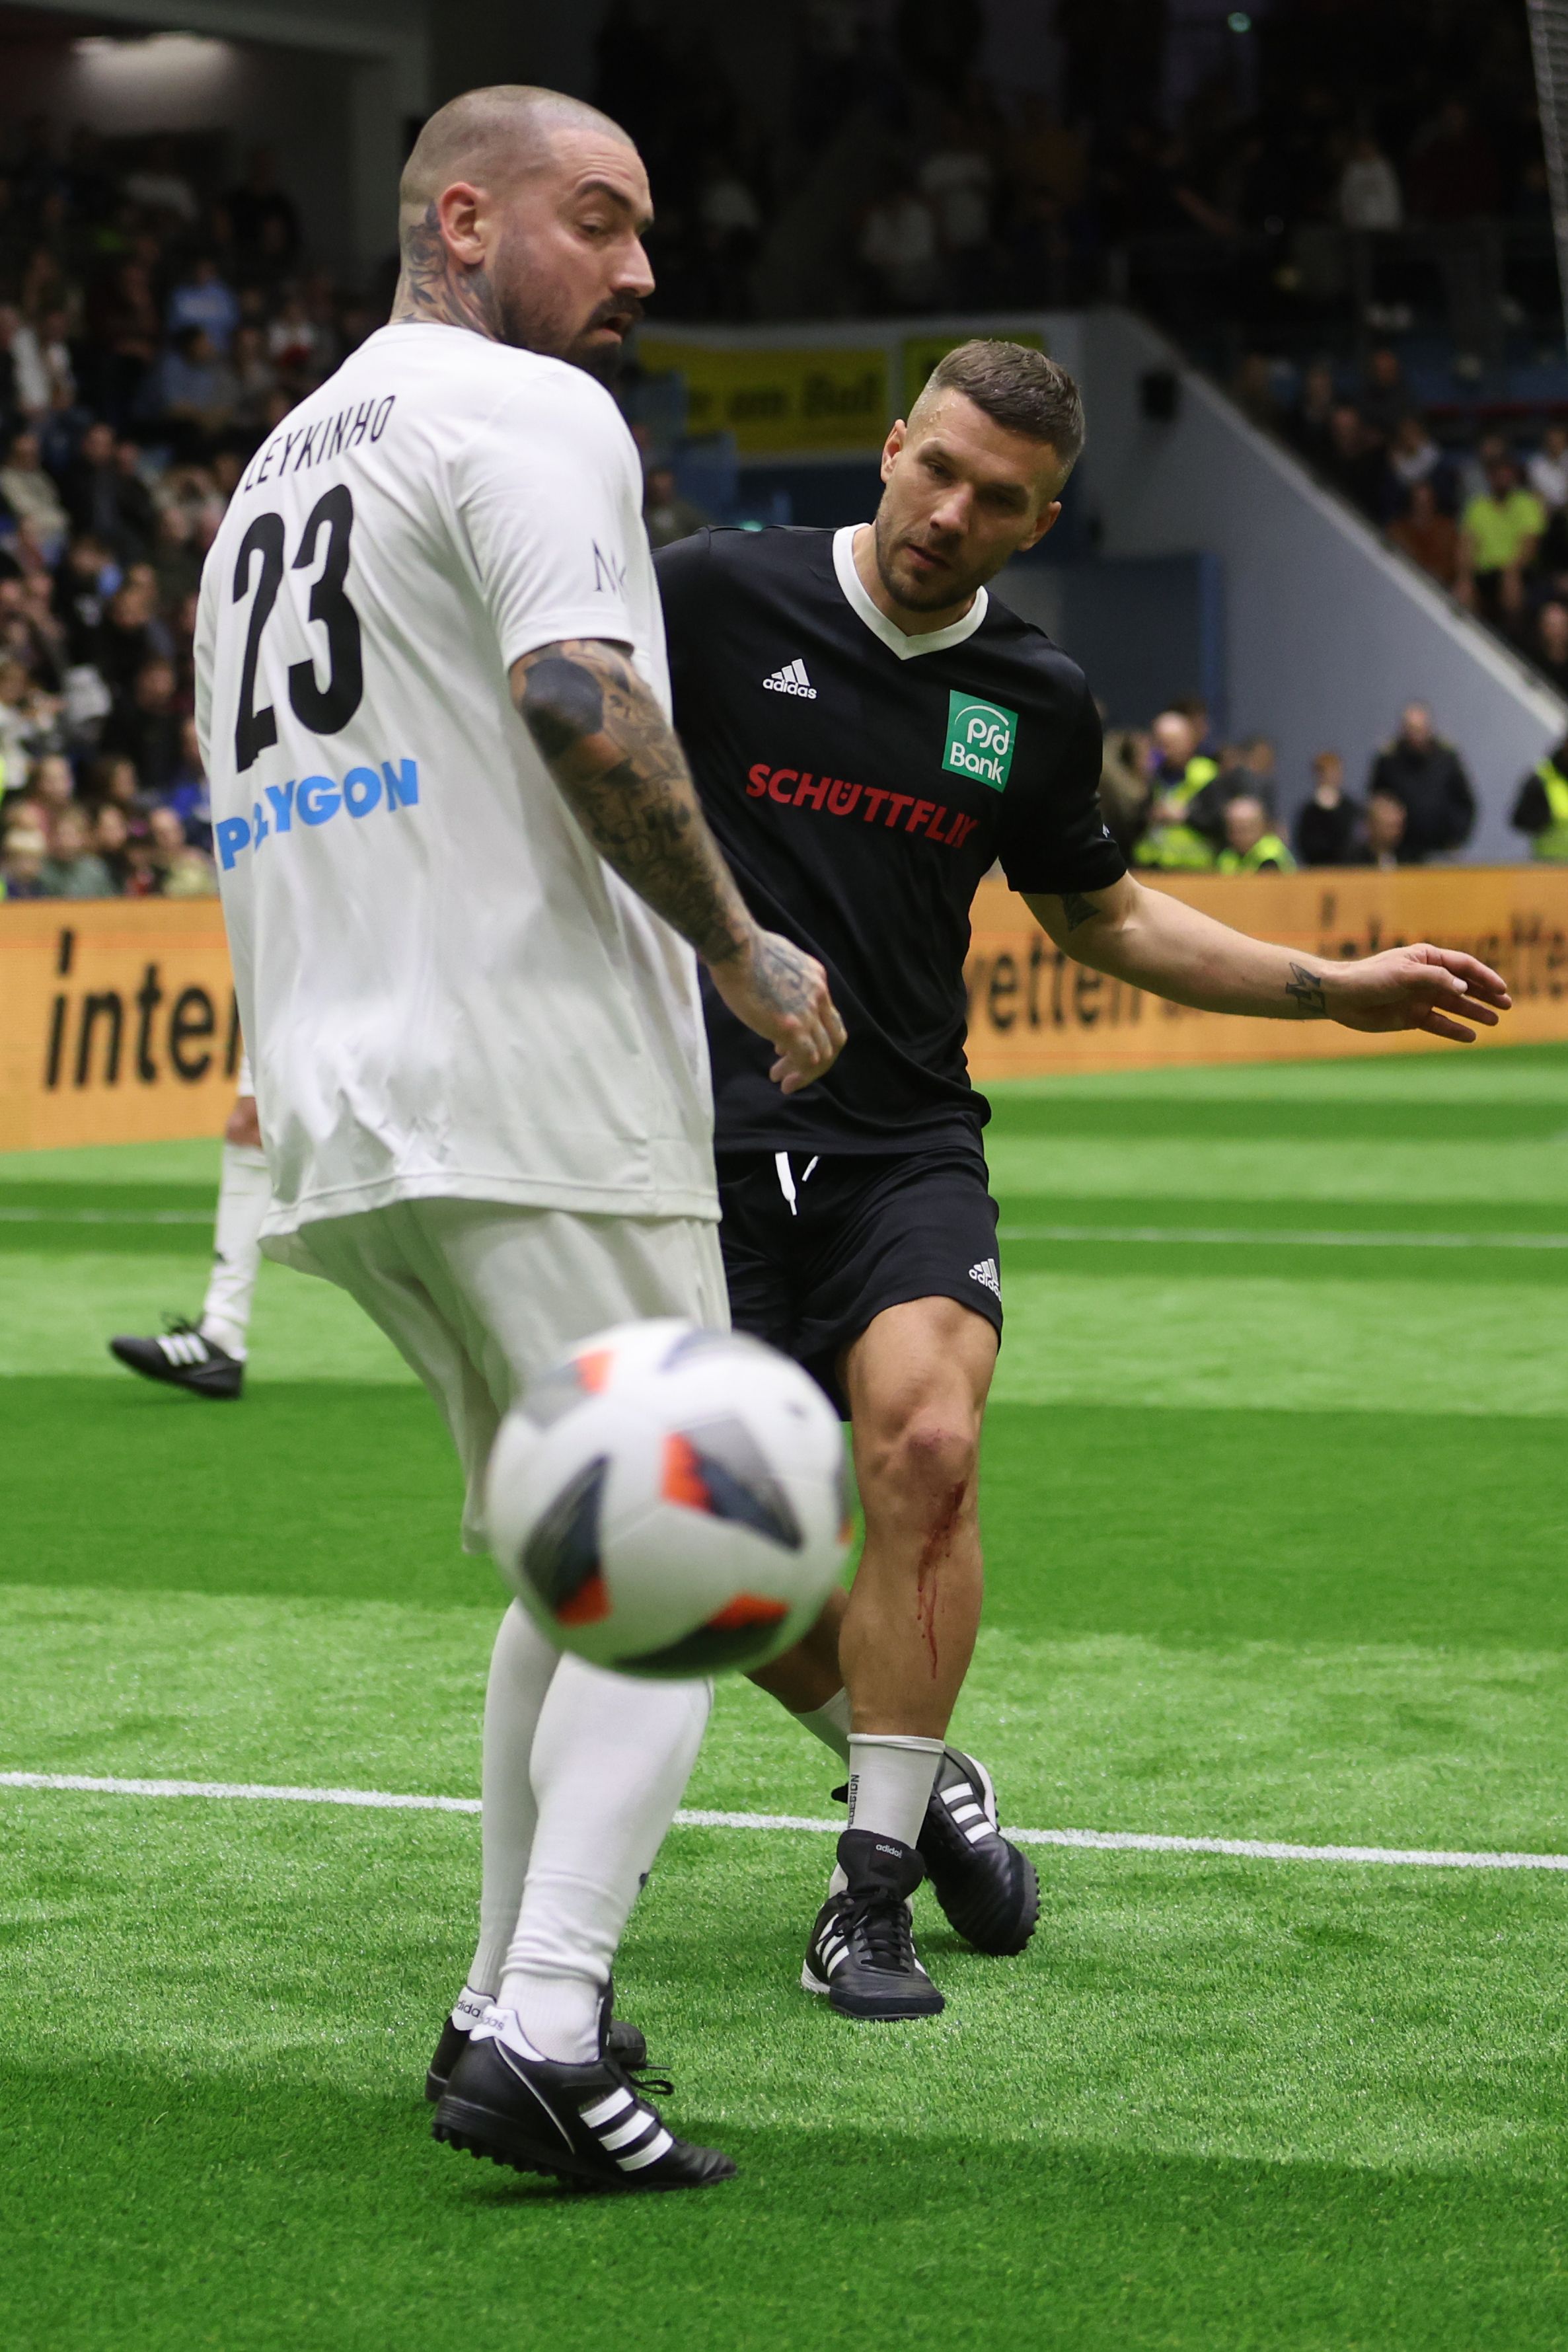 Podolski competing on an indoor pitch.